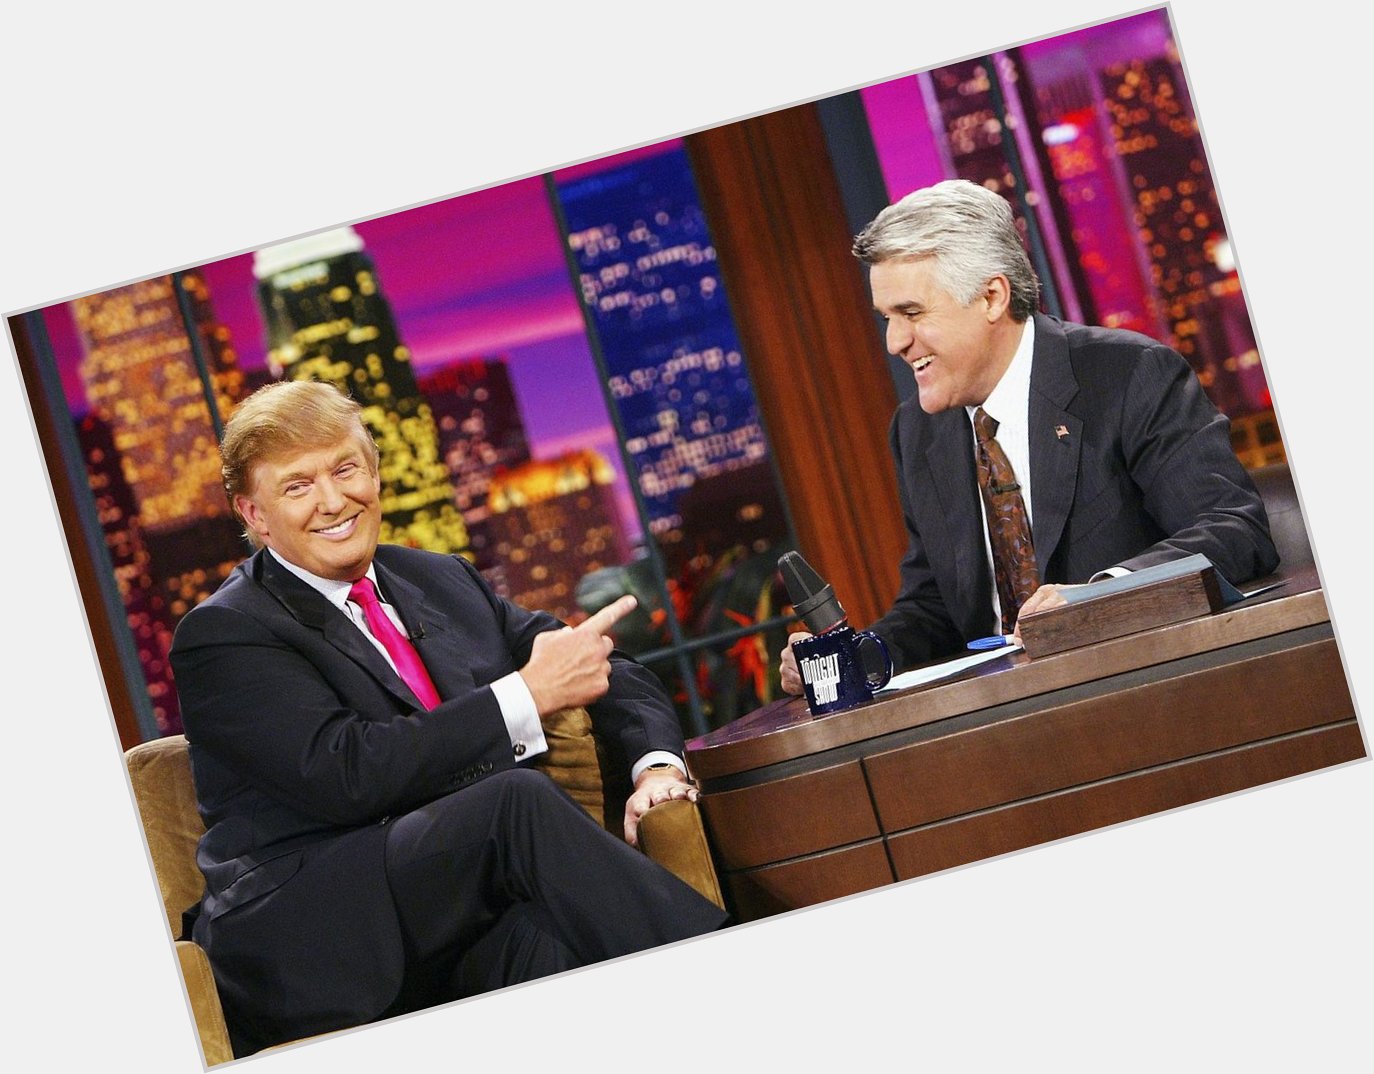 Happy Birthday to Jay Leno At age 73
Donald J. Trump The Apprentice 2004 Guest On The Jay Leno Show
message To Share 